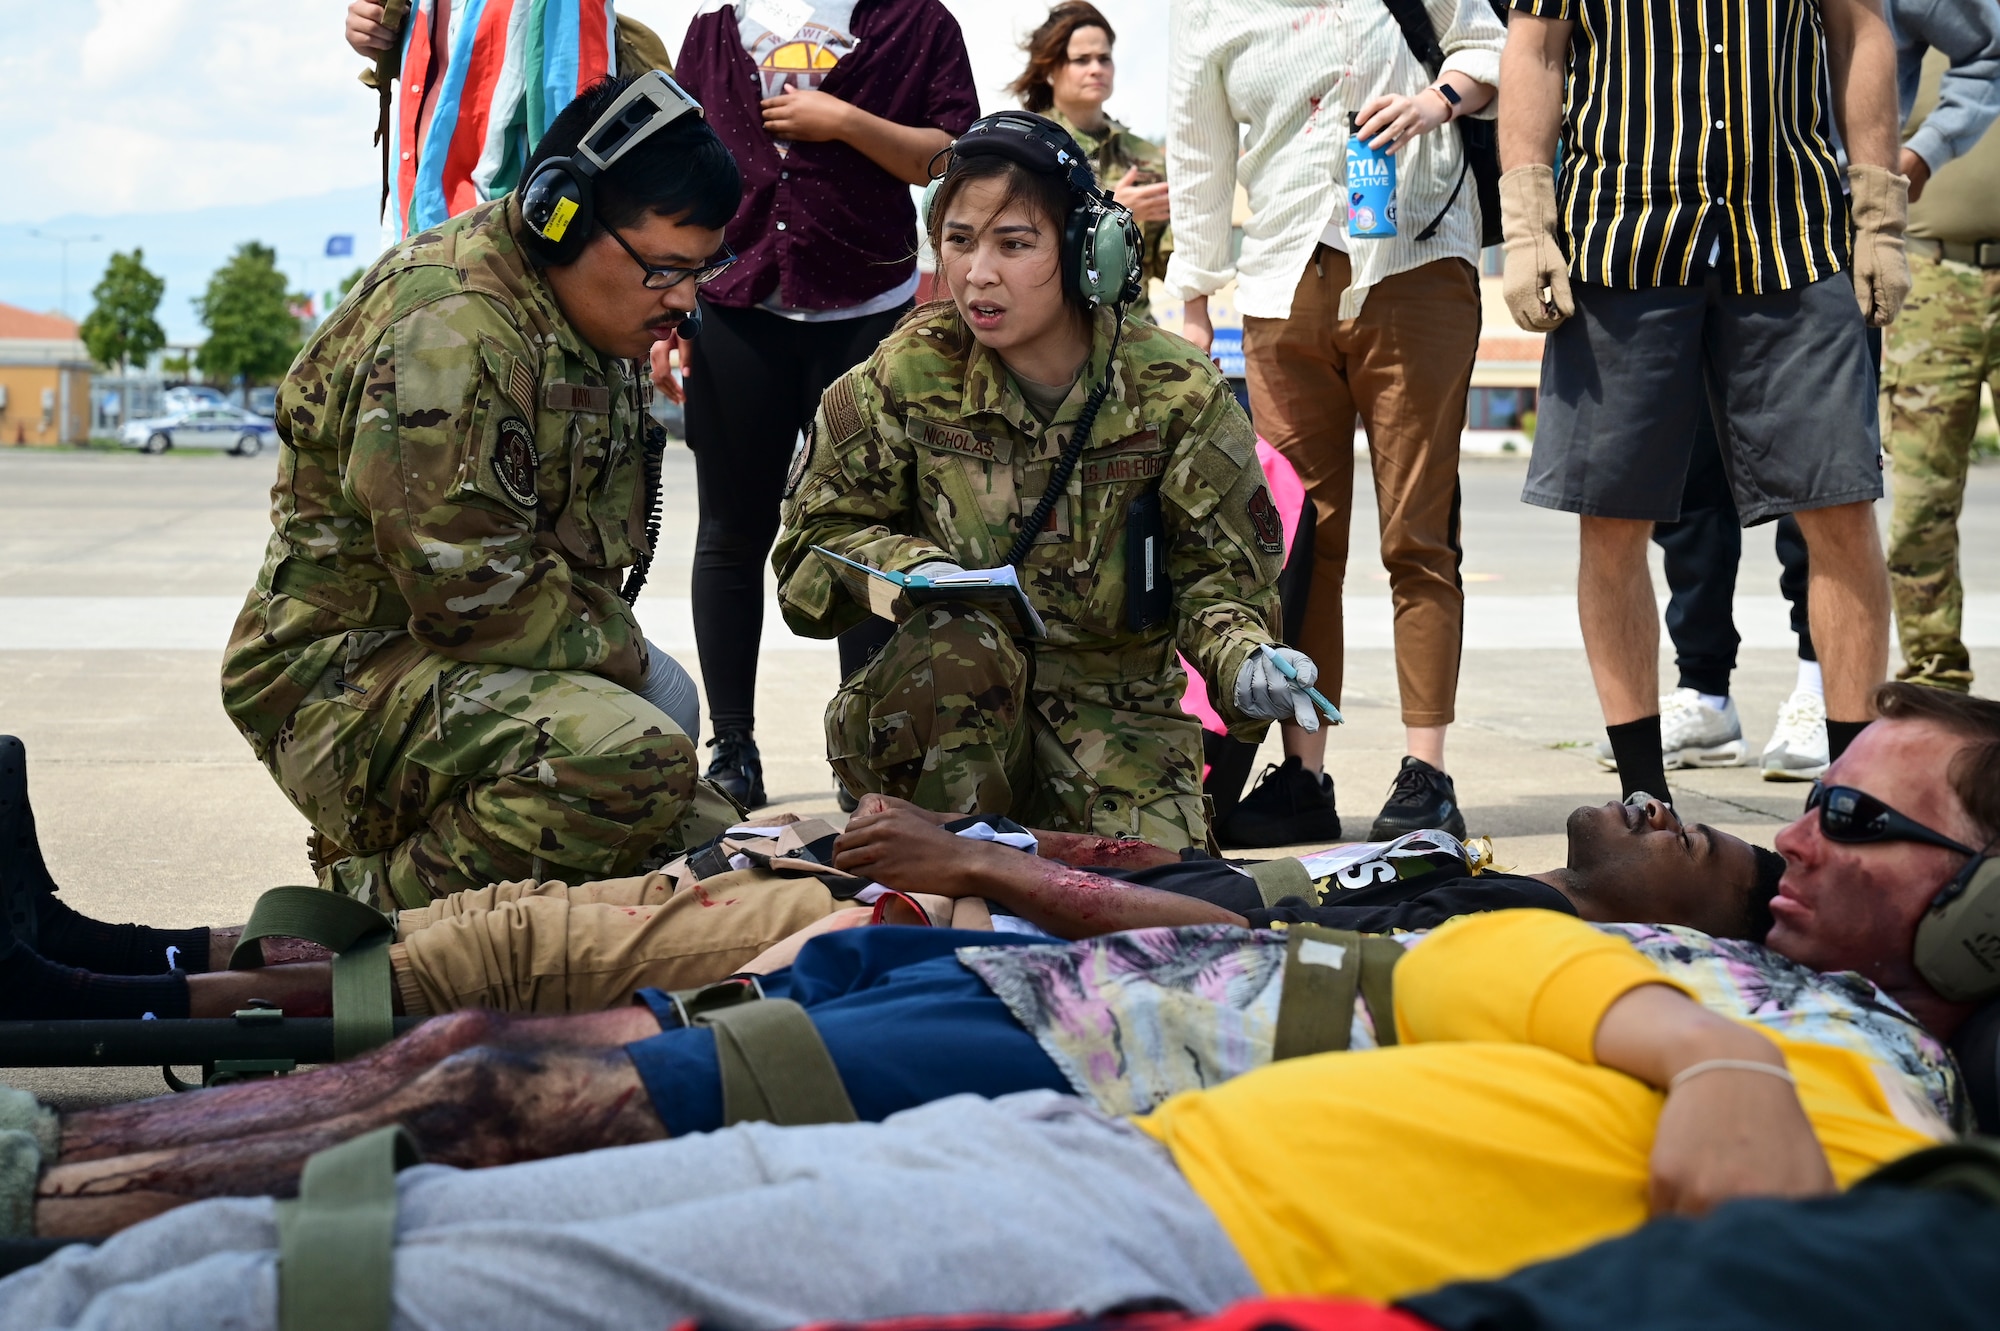 Two Airmen kneel by three stretchers as volunteer patients pretend to be injured for assessment as people watch from behind.